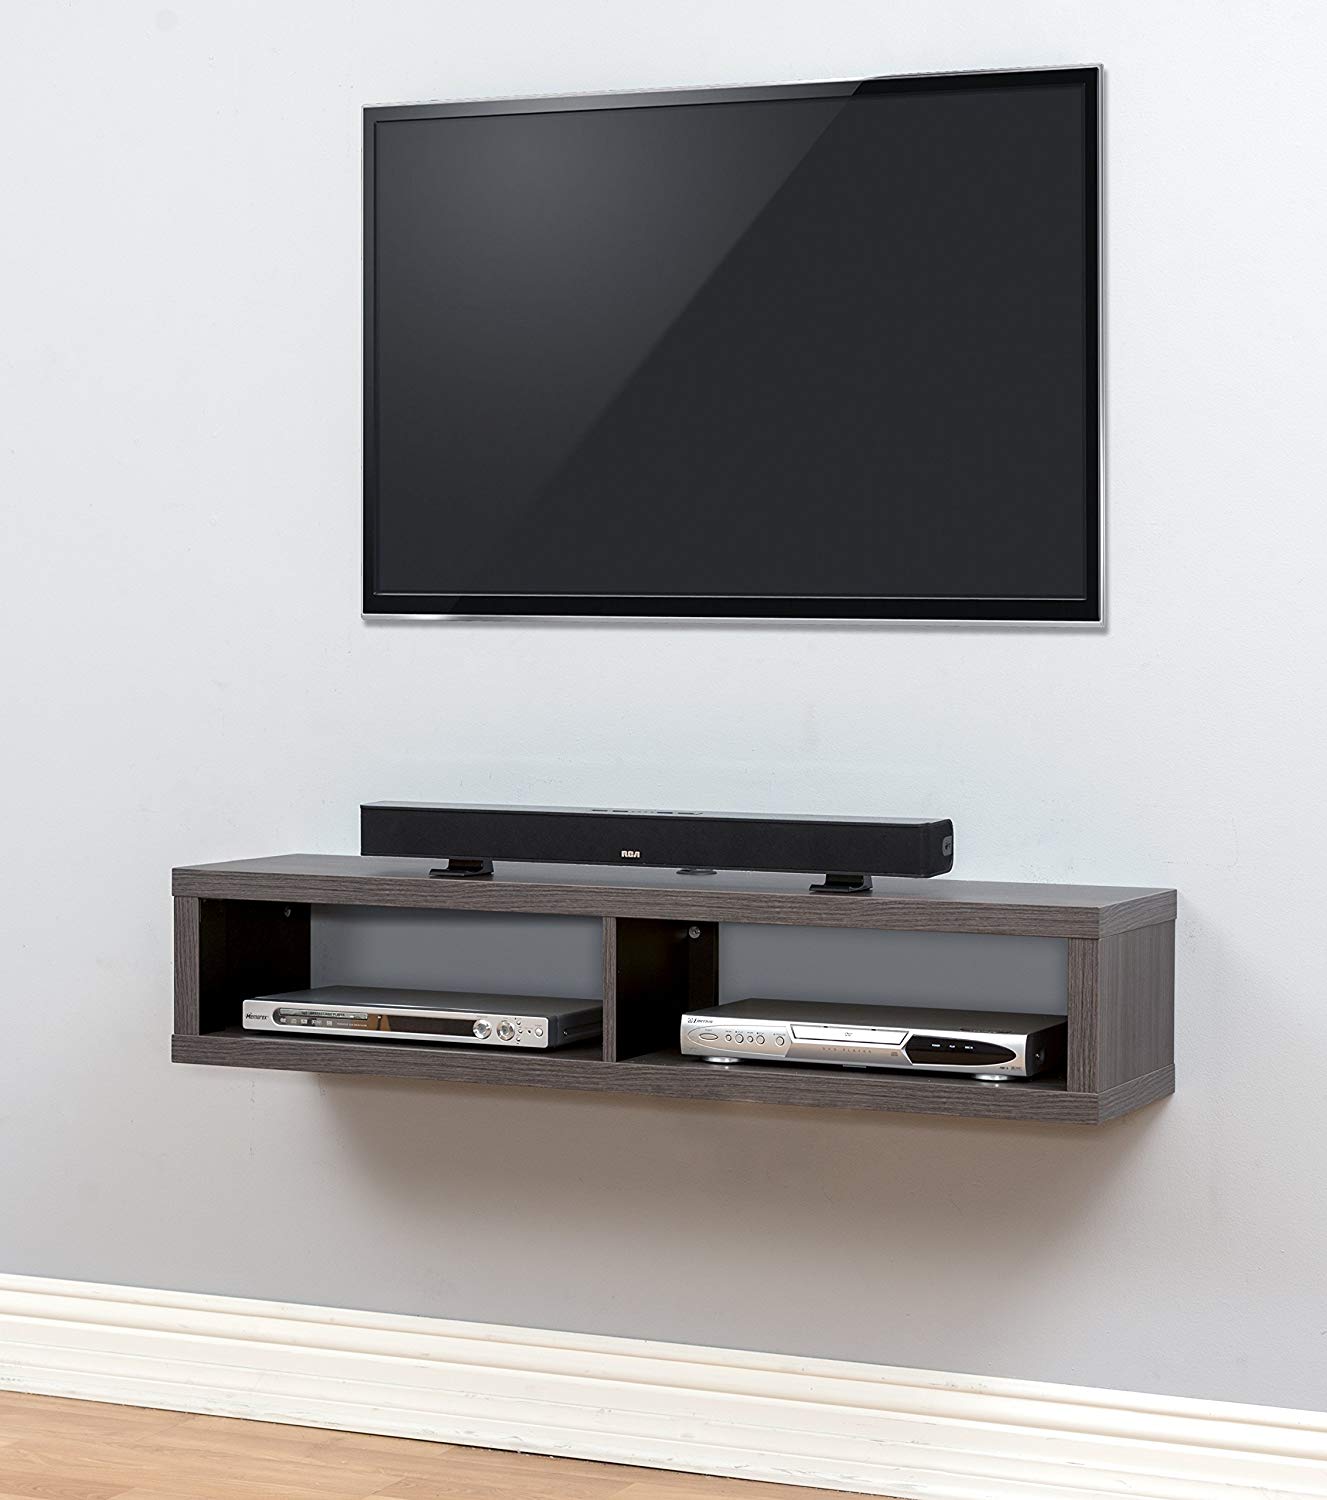 Electric Fireplace Entertainment Center Interior Design Awesome Popular Wall Mounted Tvs Innovative Design Ideasa